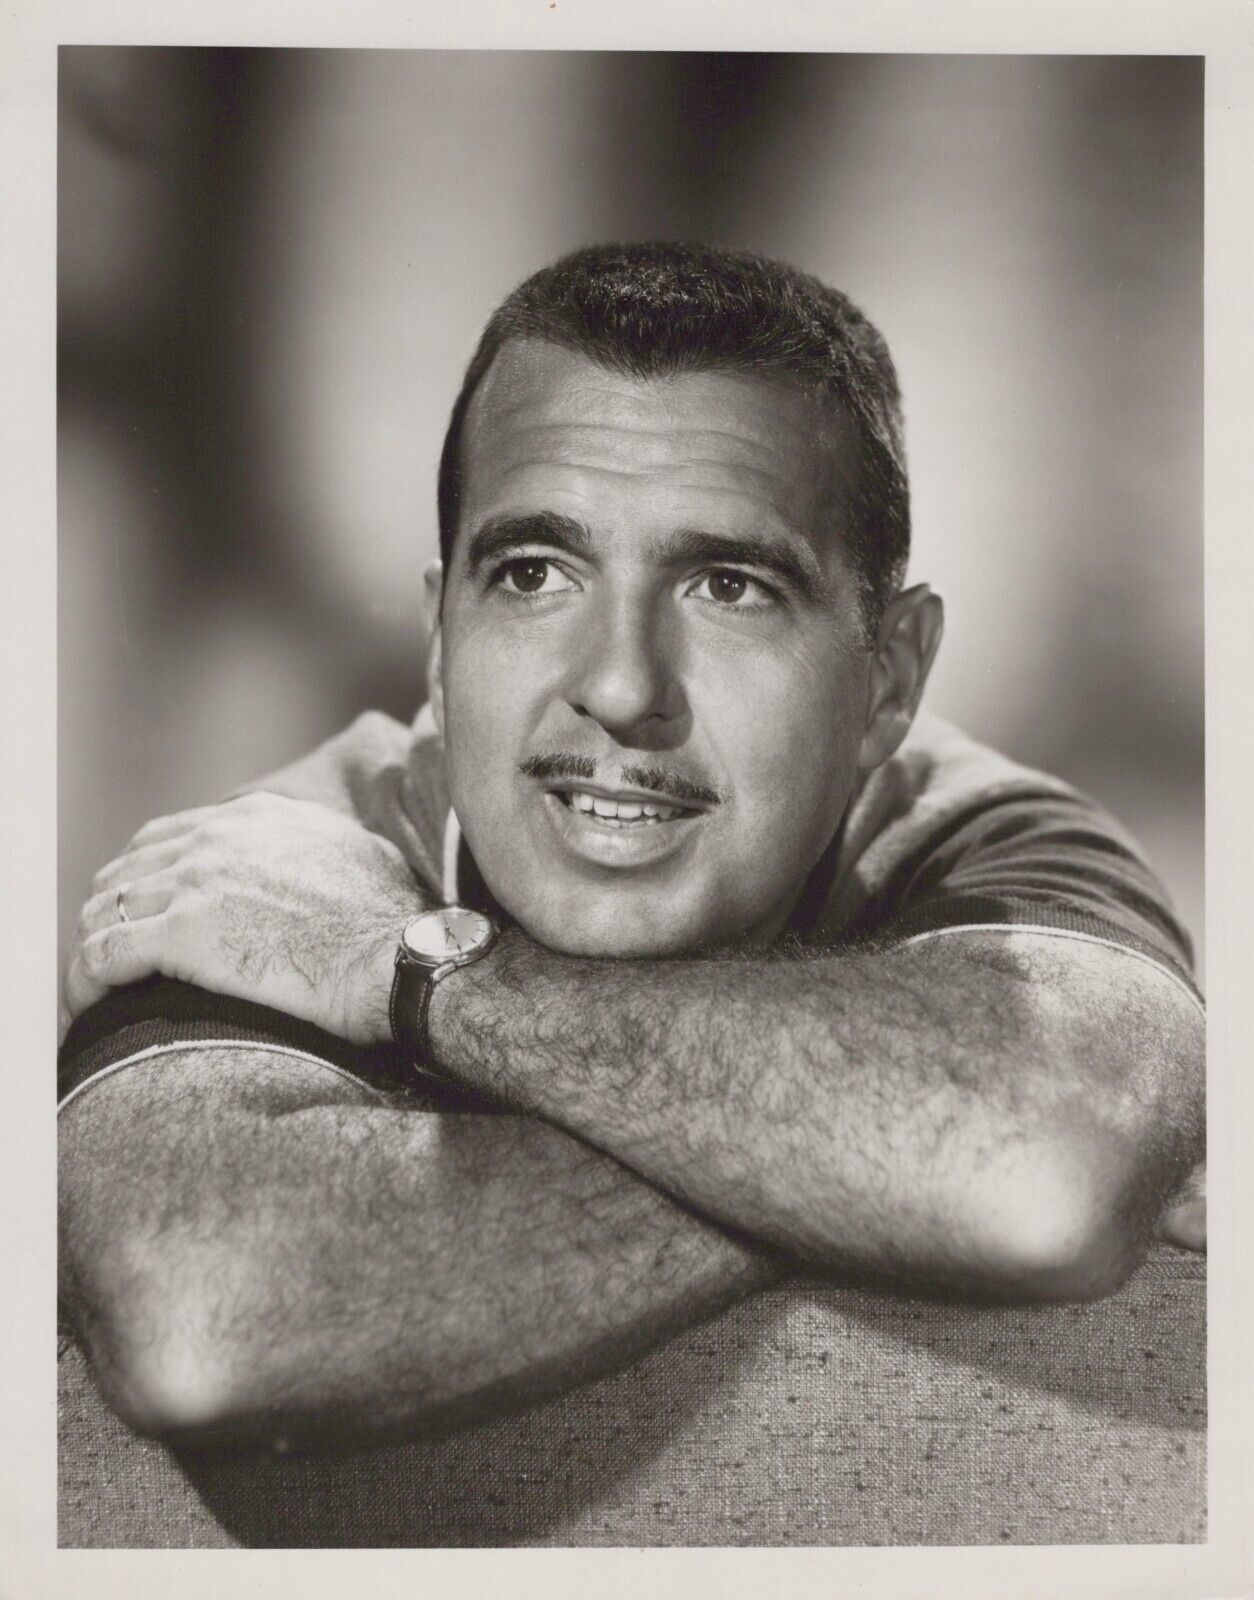 Tennessee Ernie Ford (1950s) ❤🎬 Vintage NBC Photo by Elmer Holloway K 211